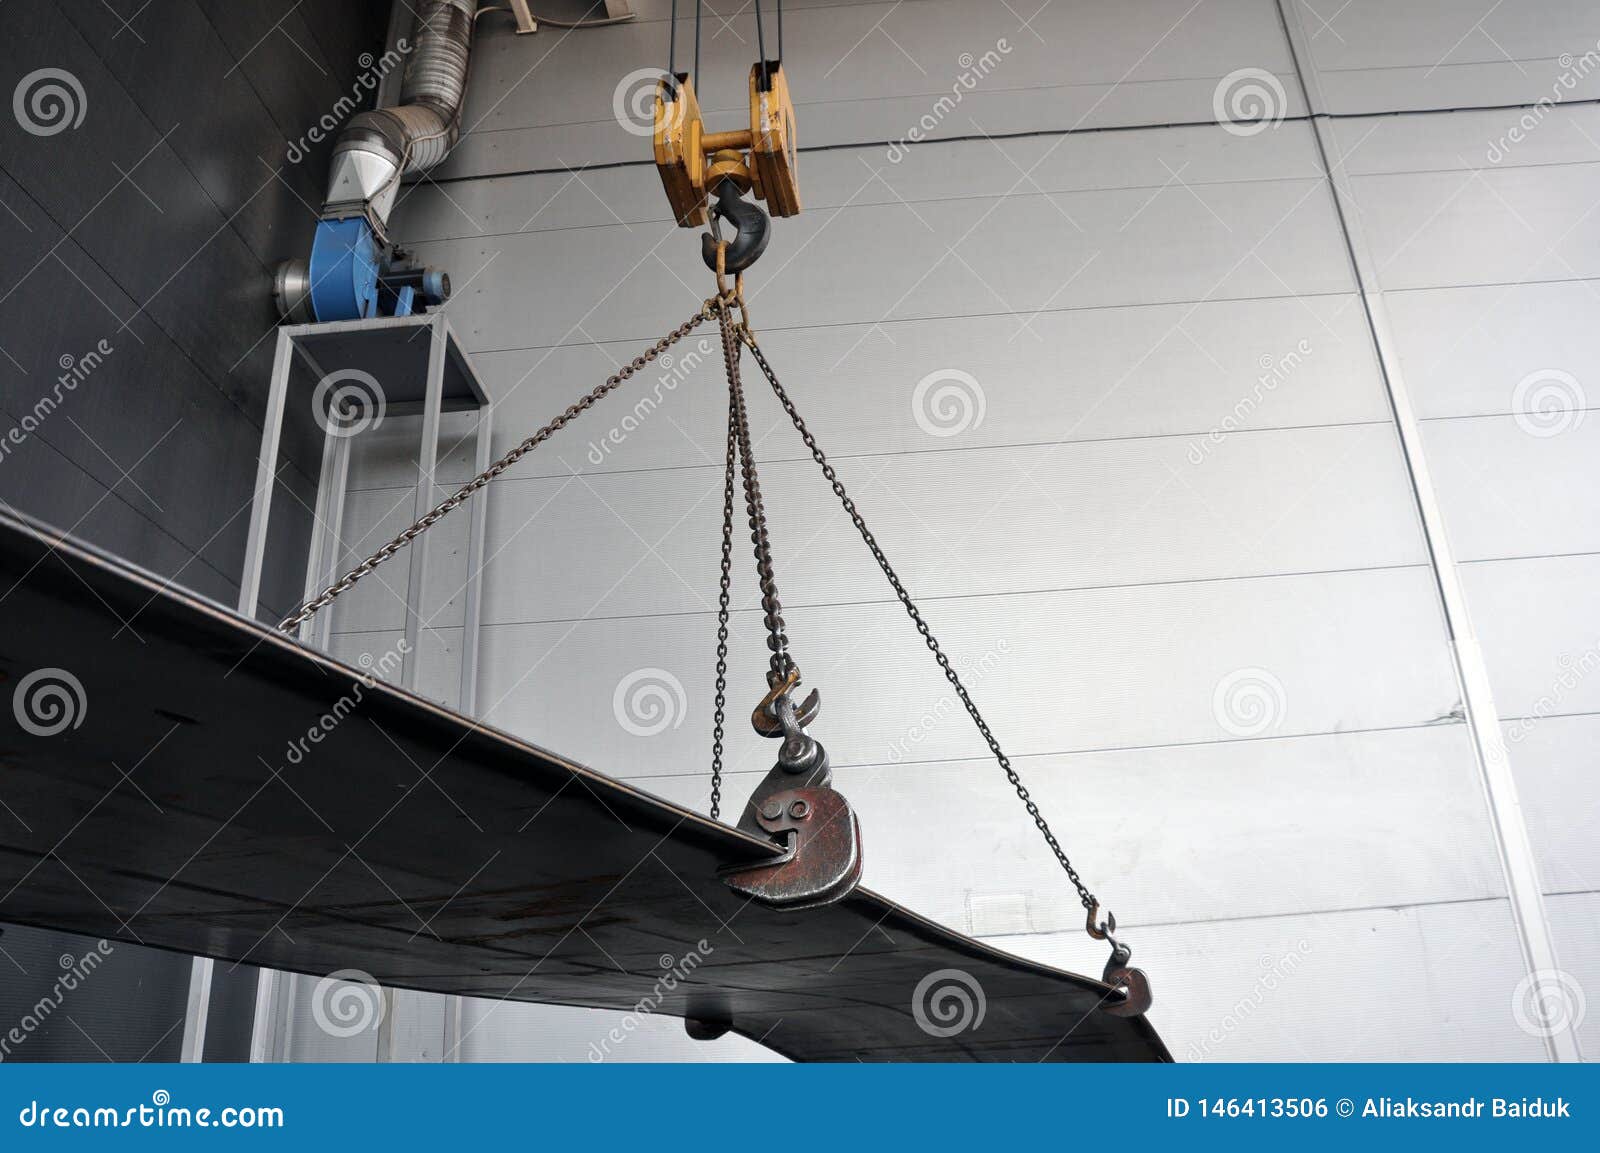 Lifting Chains And Hooks For Loading Sheet Metal. Grab Stock Photo Image of equipment